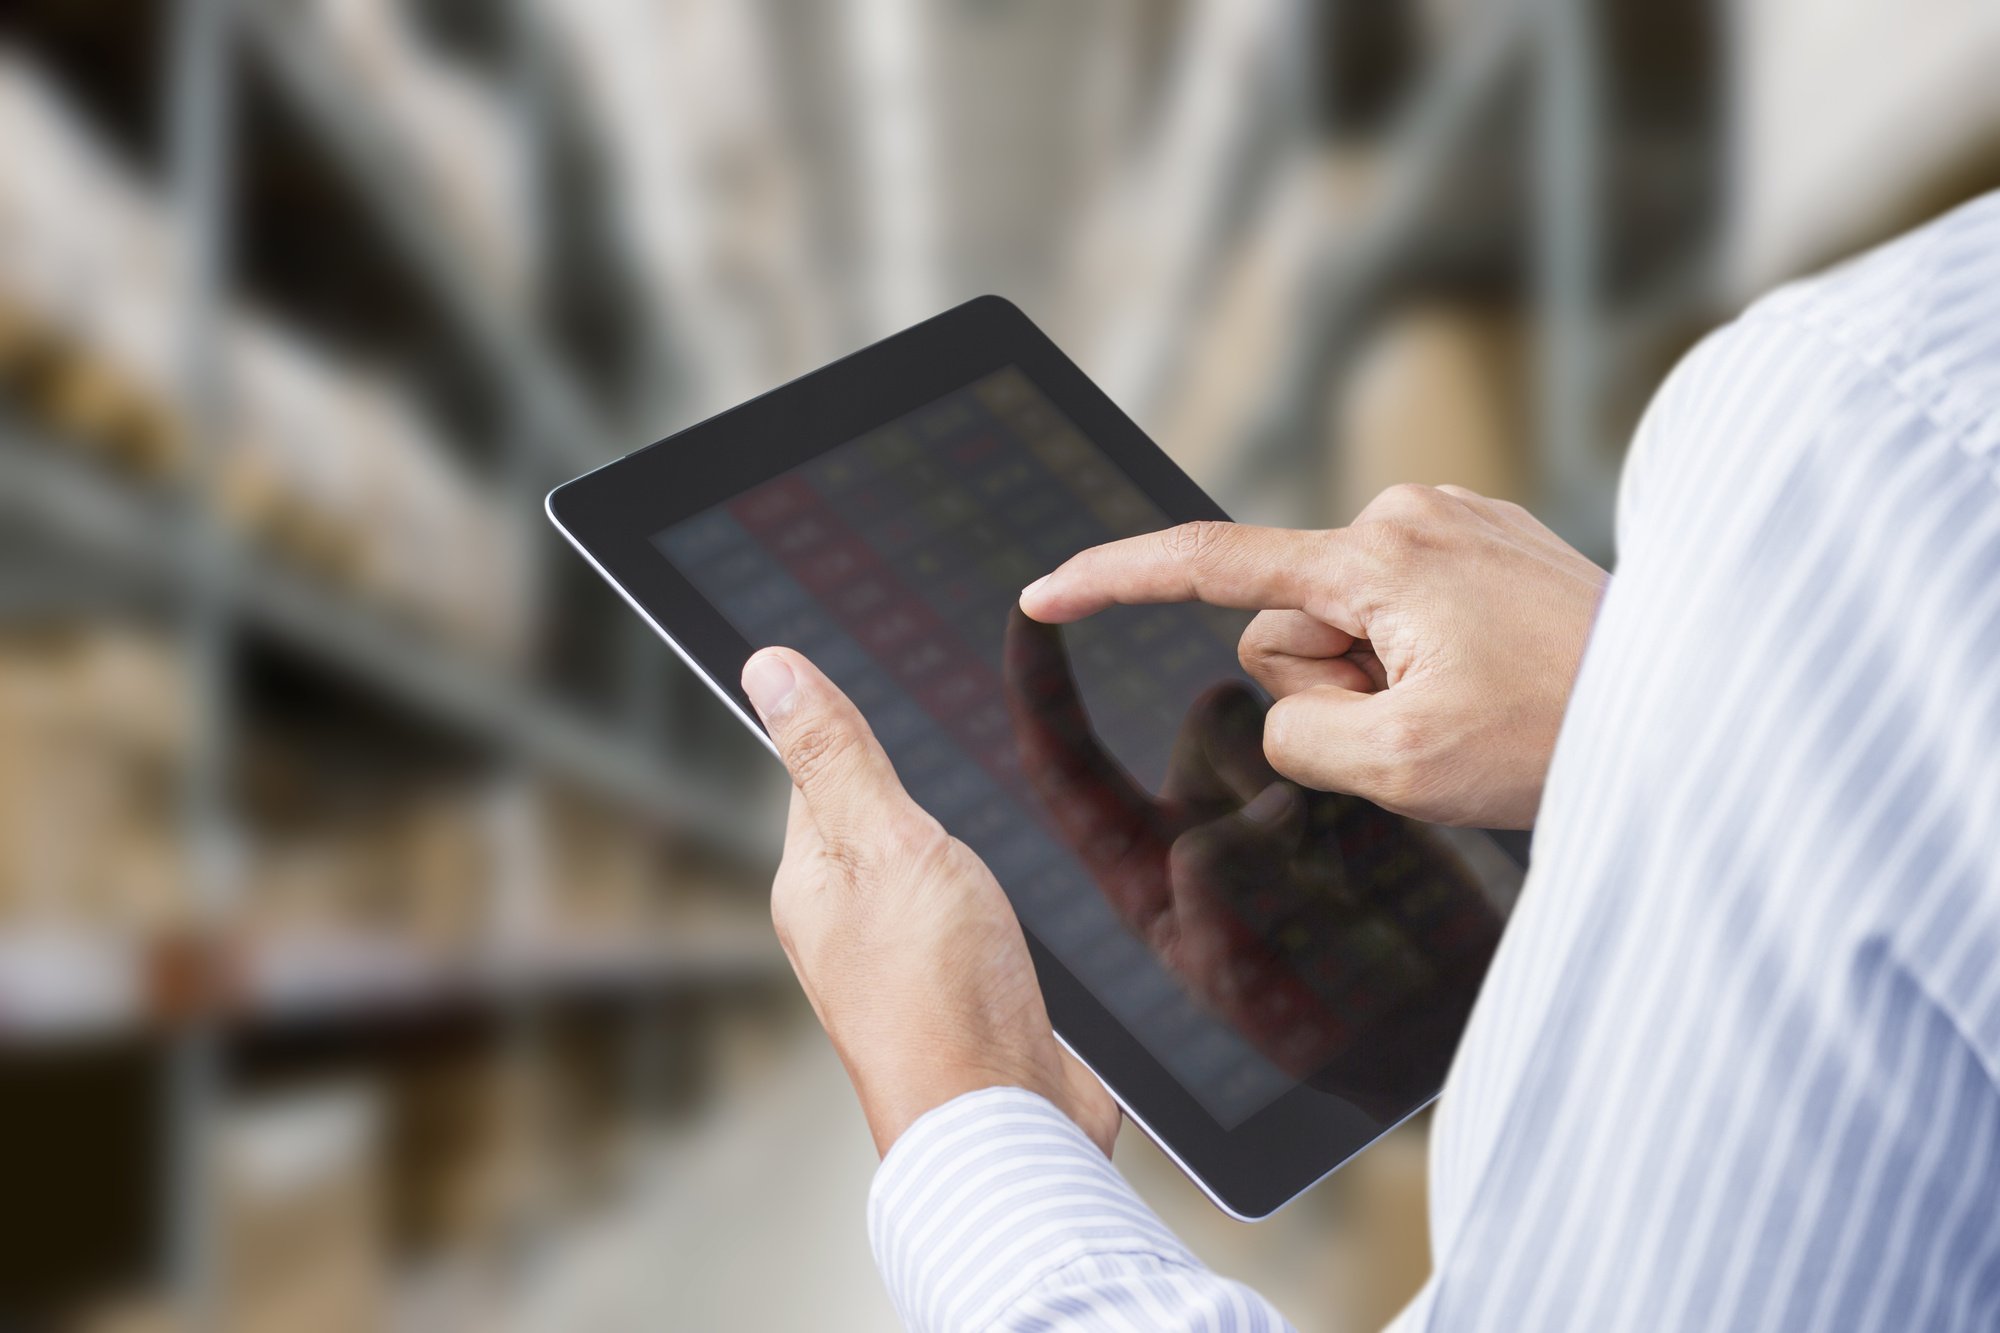 A shift in inventory can impact your operational receivables and must be monitored. Find out how to track a change in inventory and operational receivables.